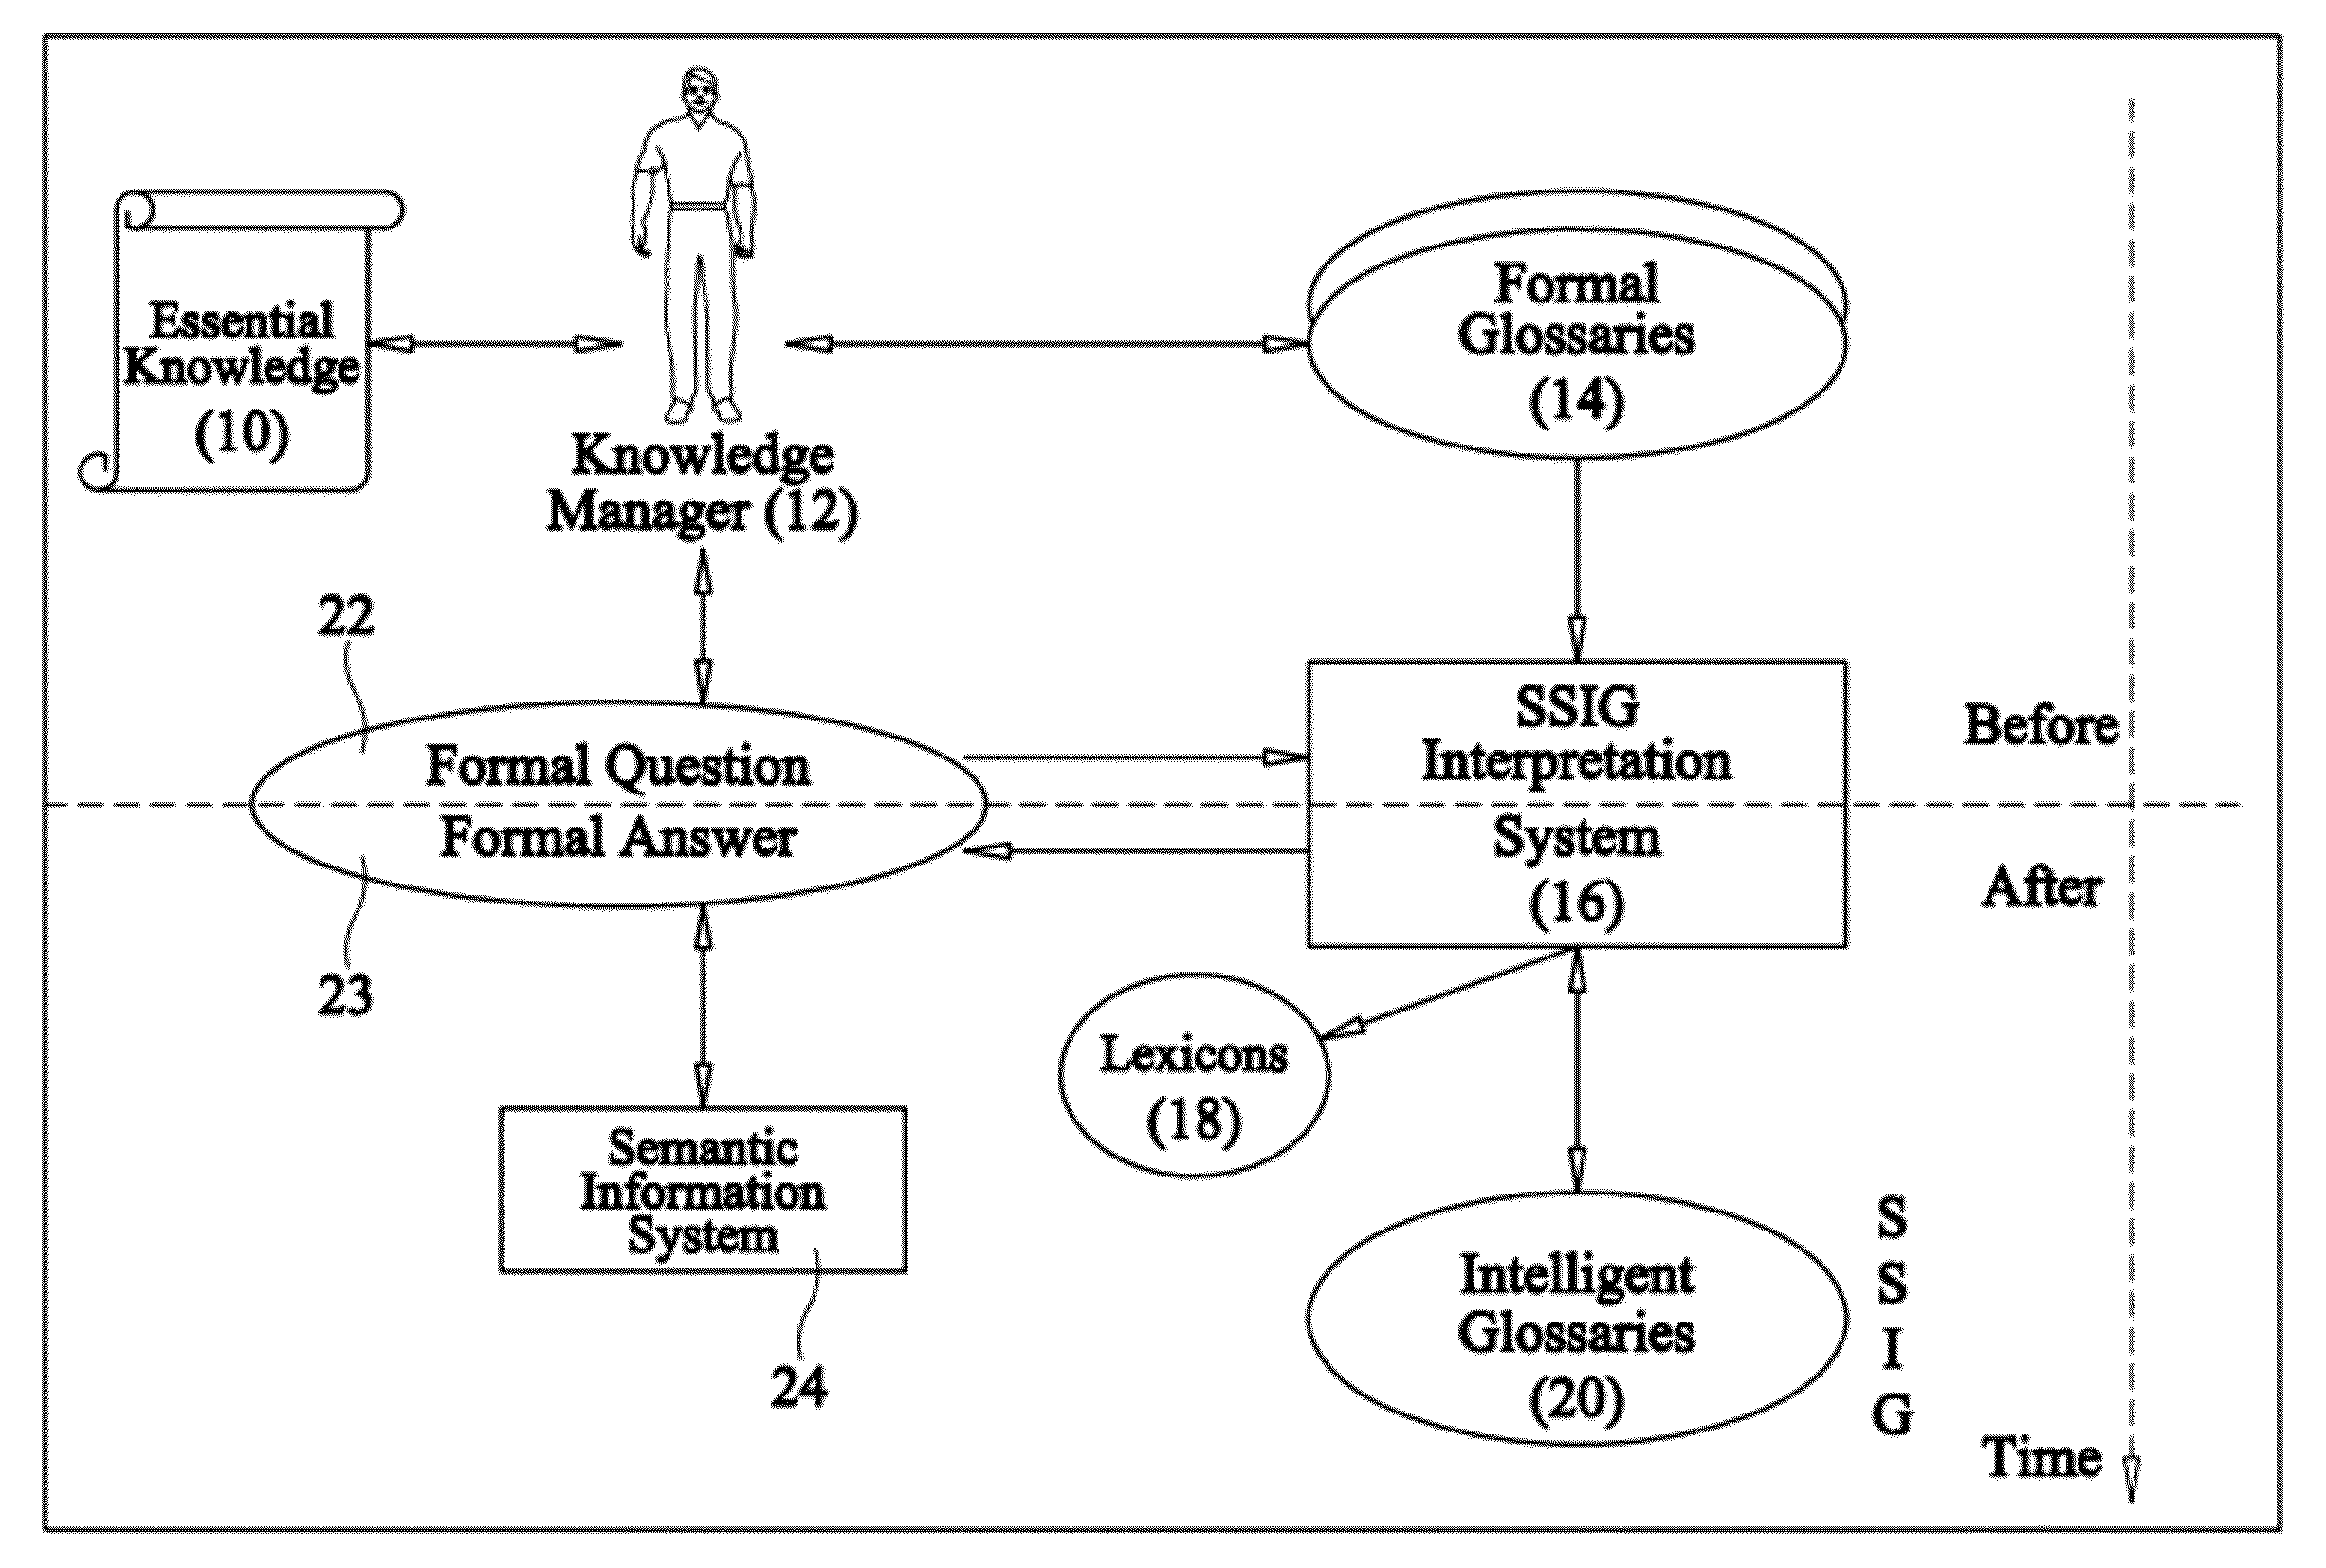 Methods and systems for constructing intelligent glossaries from distinction-based reasoning